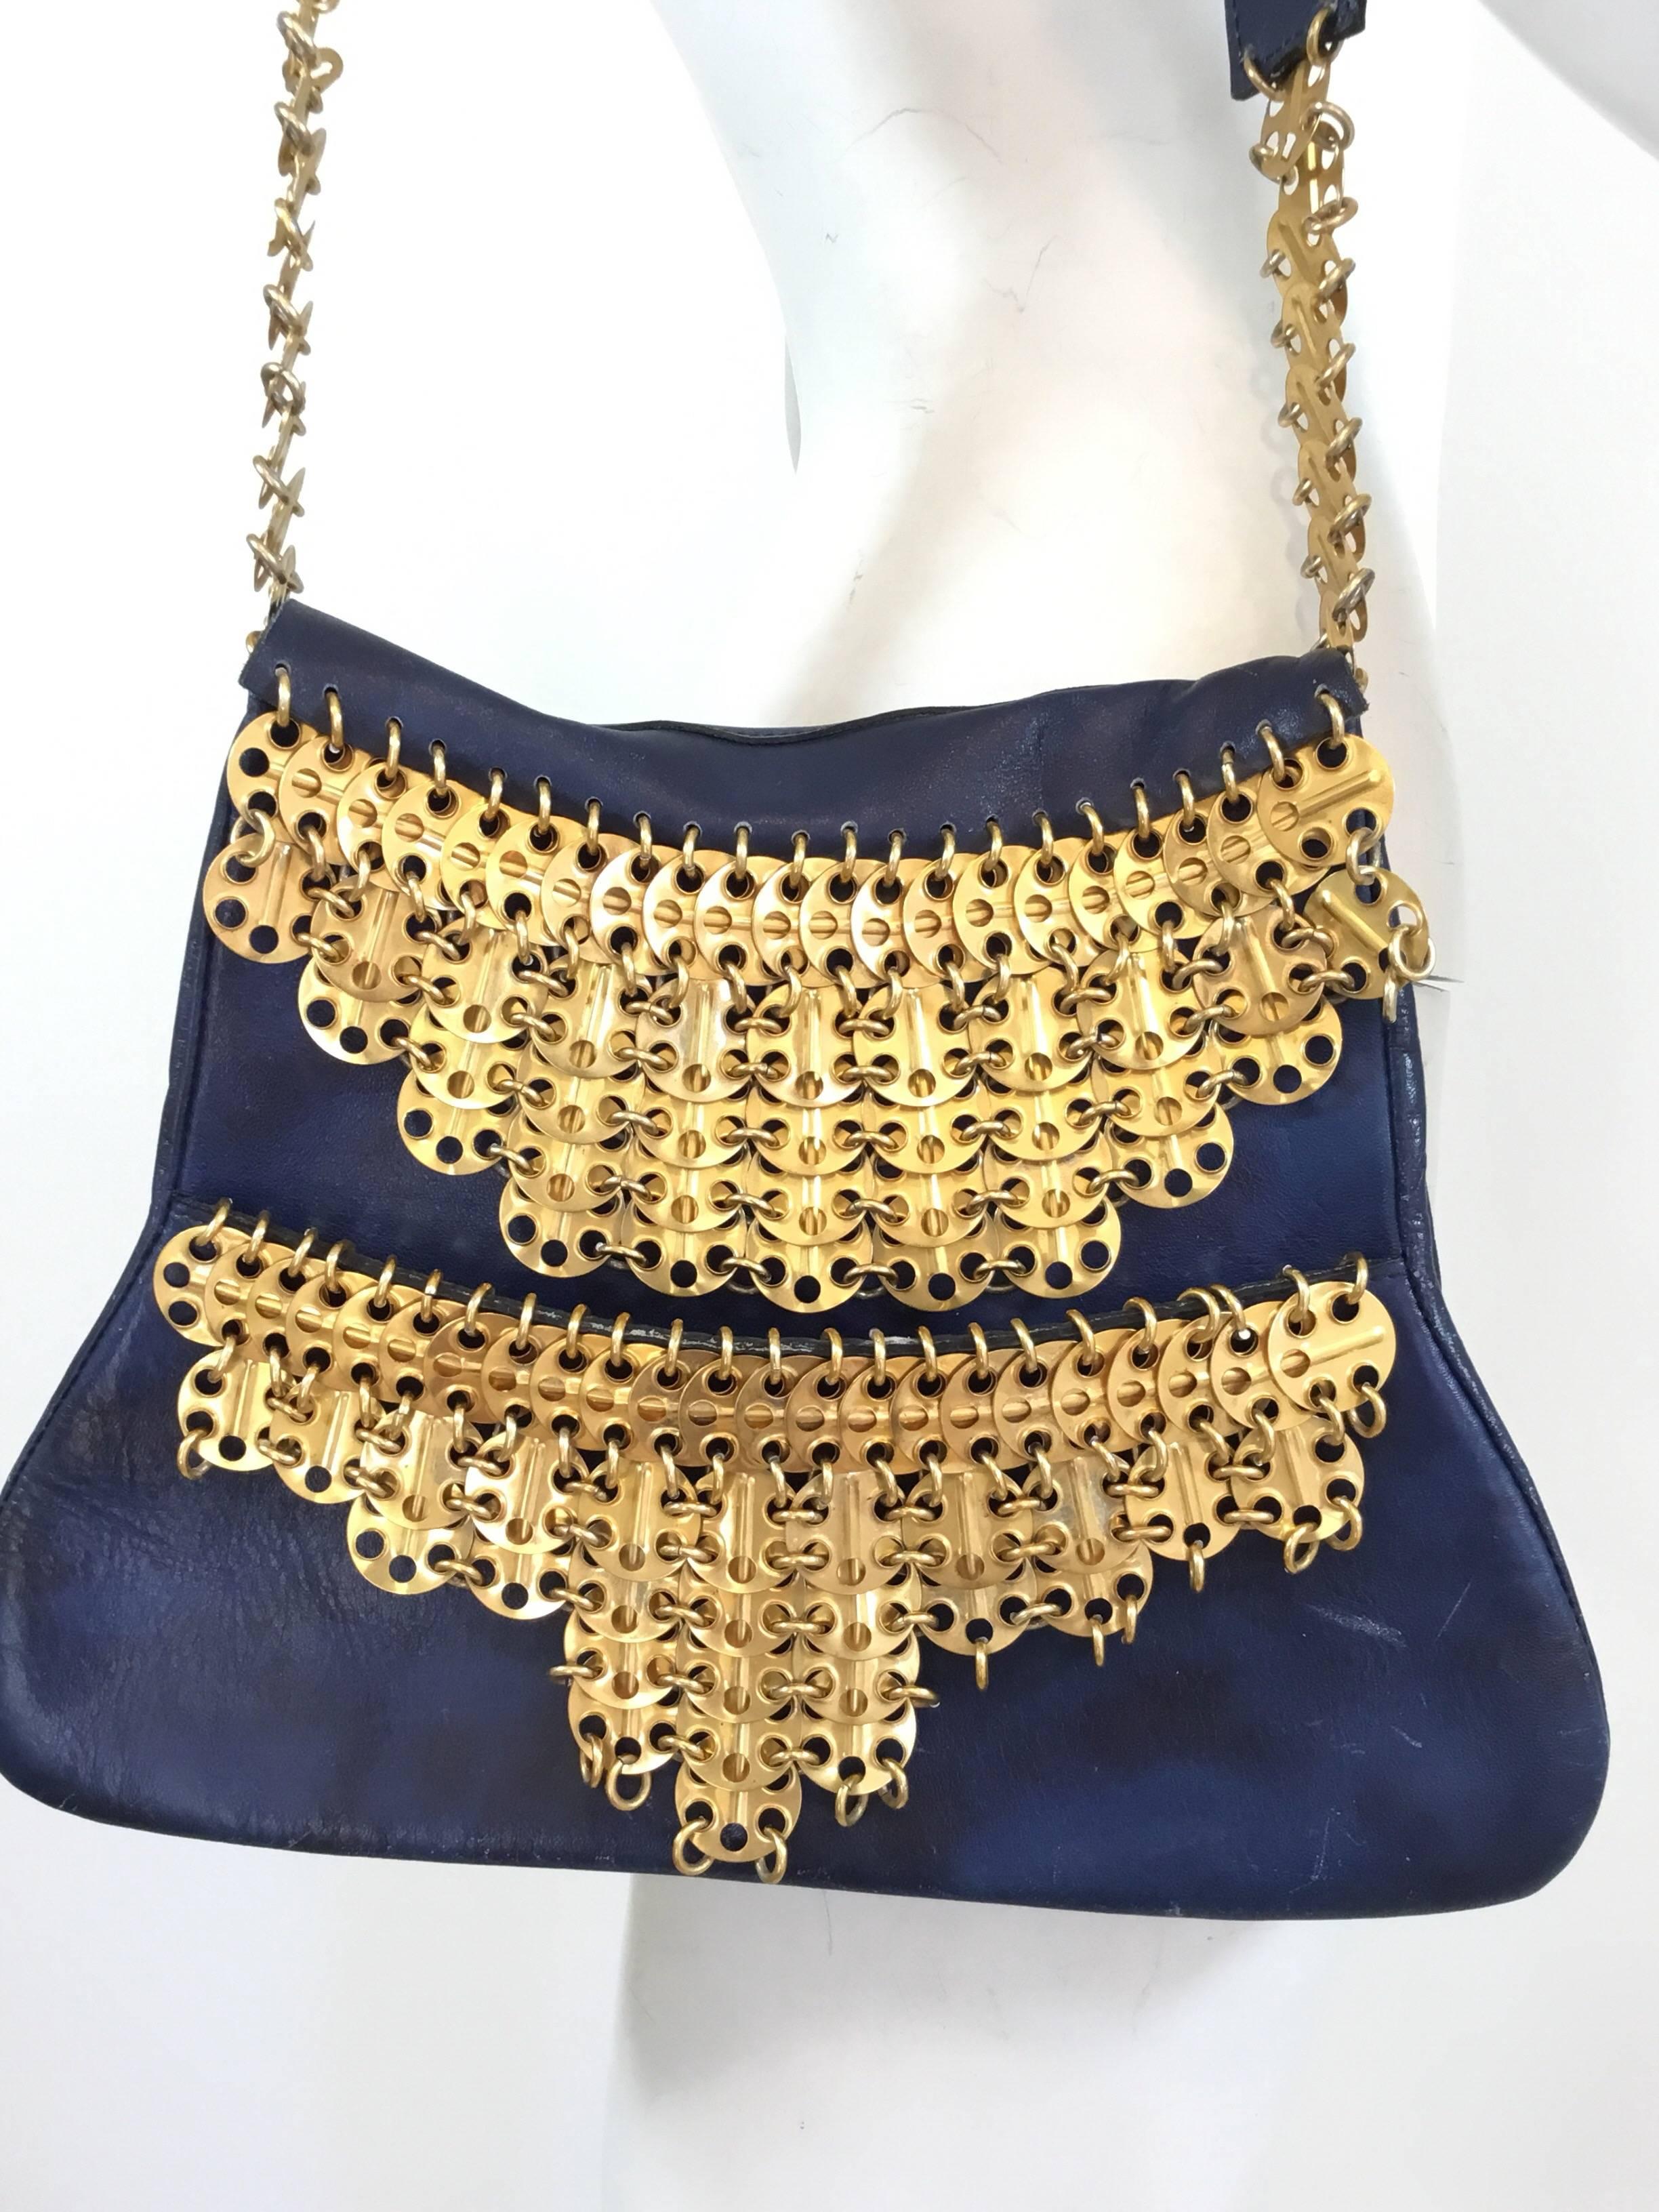 1960’s production RICAF Paco Rabanne bag featured in blue leather with gold disks. Bag has two separate compartments and a flat leather shoulder handle attached by gold disks. Bag shows some wears to the leather with spots of discoloration and